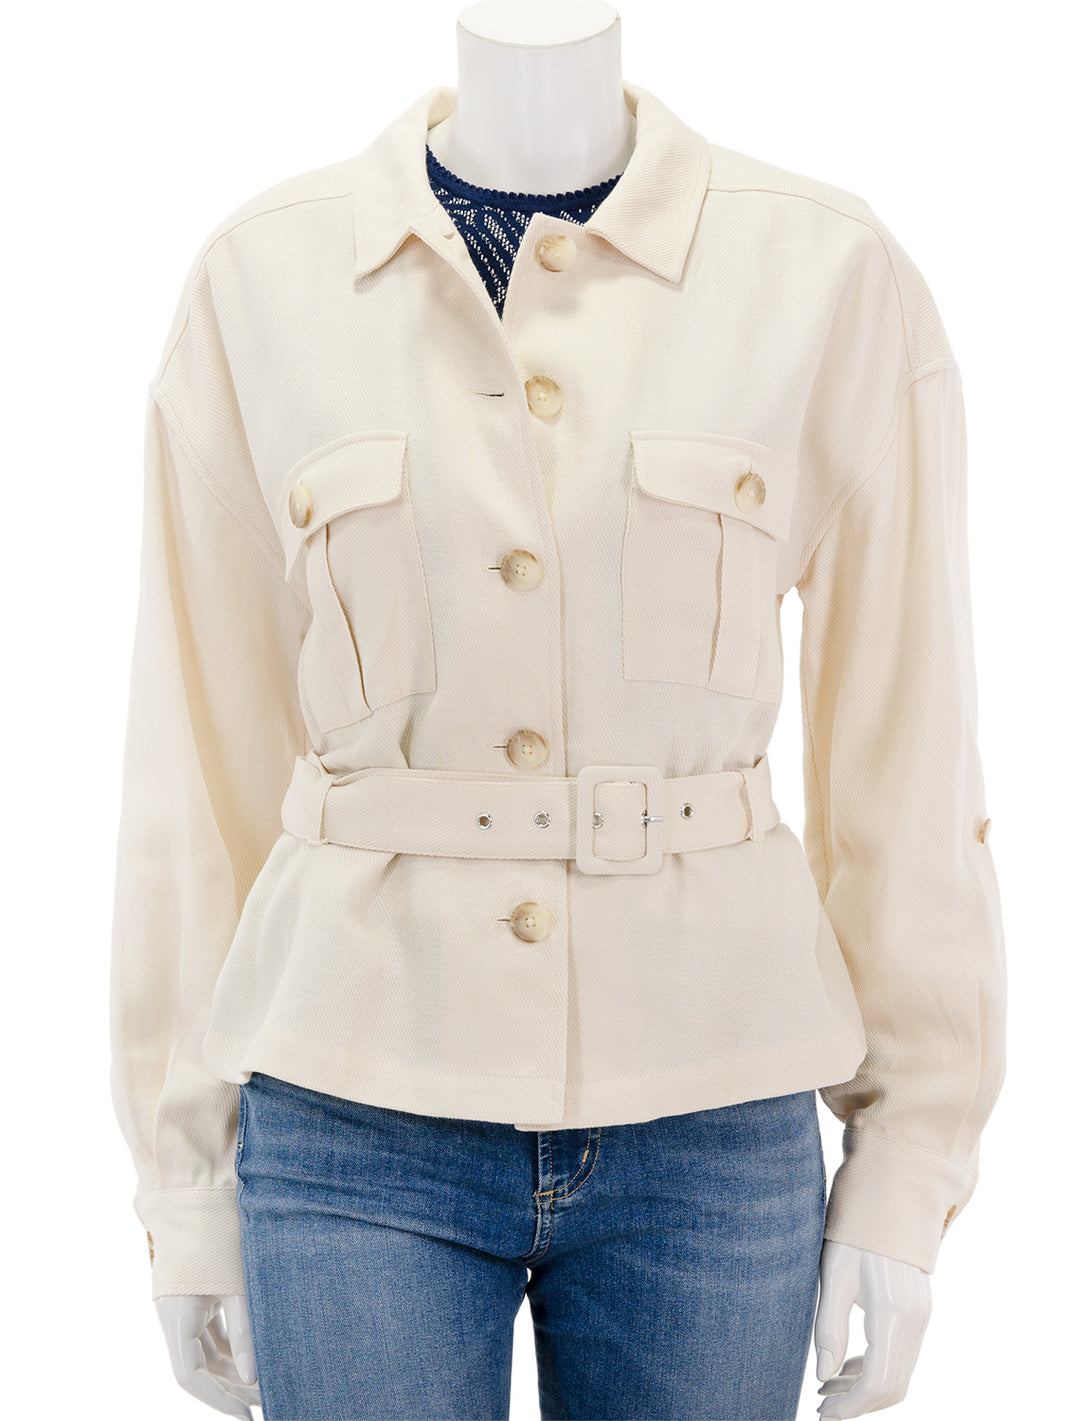 Front view of L'agence's voyage safari jacket in bone.